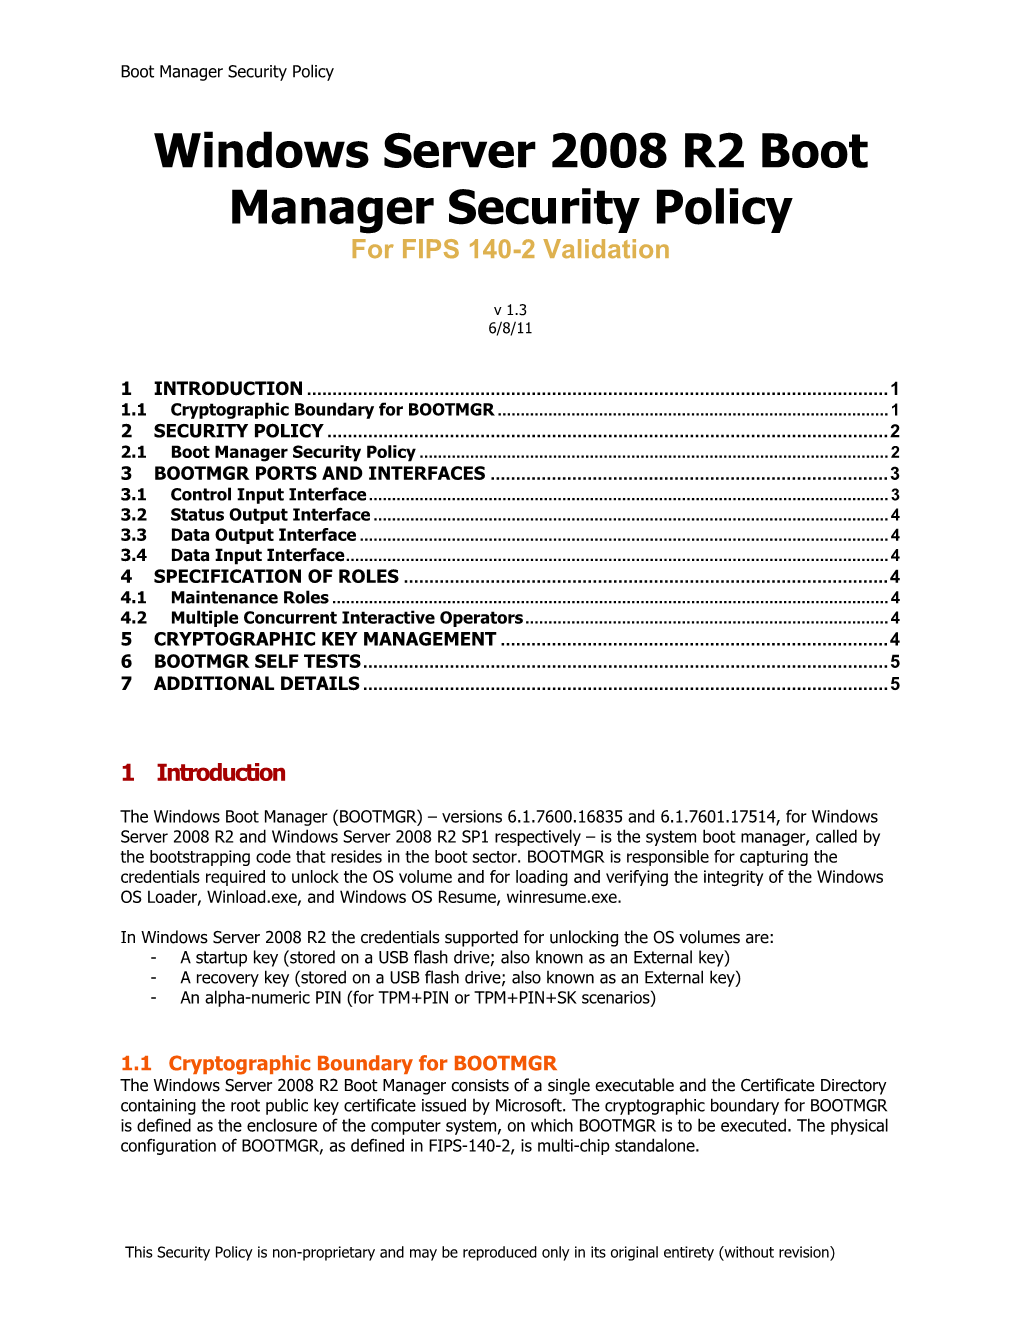 Windows Server 2008 R2 Boot Manager Security Policy for FIPS 140-2 Validation